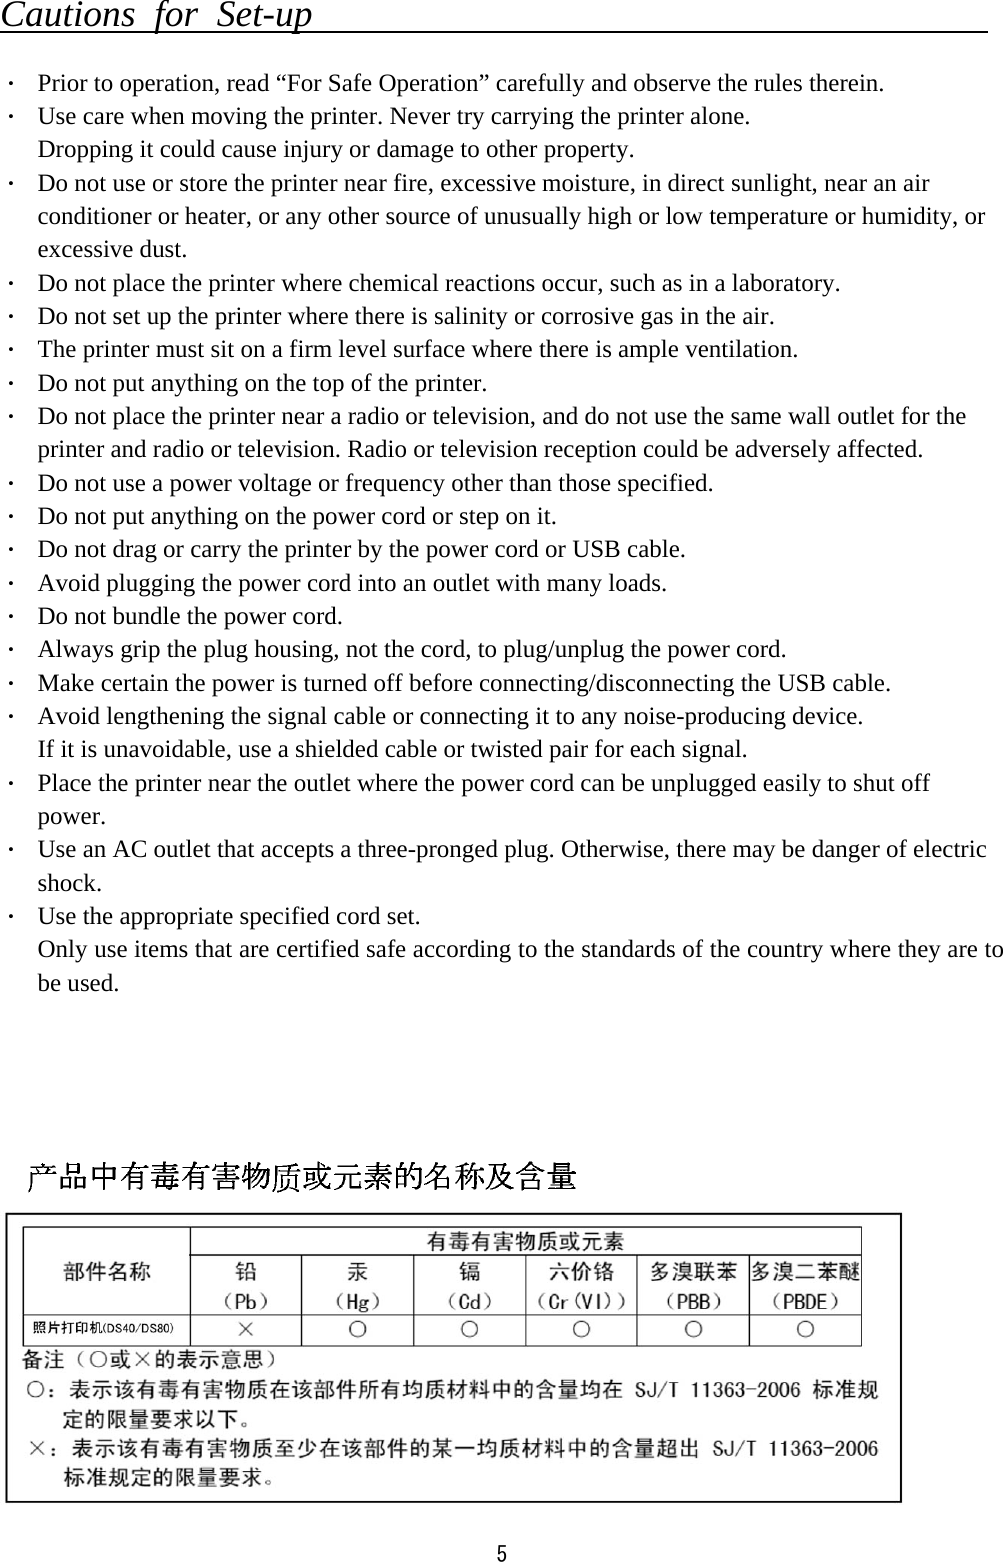  5Cautions for Set-up                                      ・  Prior to operation, read “For Safe Operation” carefully and observe the rules therein. ・  Use care when moving the printer. Never try carrying the printer alone. Dropping it could cause injury or damage to other property. ・  Do not use or store the printer near fire, excessive moisture, in direct sunlight, near an air conditioner or heater, or any other source of unusually high or low temperature or humidity, or excessive dust. ・  Do not place the printer where chemical reactions occur, such as in a laboratory. ・  Do not set up the printer where there is salinity or corrosive gas in the air. ・  The printer must sit on a firm level surface where there is ample ventilation. ・  Do not put anything on the top of the printer. ・  Do not place the printer near a radio or television, and do not use the same wall outlet for the printer and radio or television. Radio or television reception could be adversely affected. ・  Do not use a power voltage or frequency other than those specified. ・  Do not put anything on the power cord or step on it. ・  Do not drag or carry the printer by the power cord or USB cable. ・  Avoid plugging the power cord into an outlet with many loads. ・  Do not bundle the power cord. ・  Always grip the plug housing, not the cord, to plug/unplug the power cord. ・  Make certain the power is turned off before connecting/disconnecting the USB cable. ・  Avoid lengthening the signal cable or connecting it to any noise-producing device. If it is unavoidable, use a shielded cable or twisted pair for each signal. ・  Place the printer near the outlet where the power cord can be unplugged easily to shut off power. ・  Use an AC outlet that accepts a three-pronged plug. Otherwise, there may be danger of electric shock. ・  Use the appropriate specified cord set. Only use items that are certified safe according to the standards of the country where they are to be used.                   